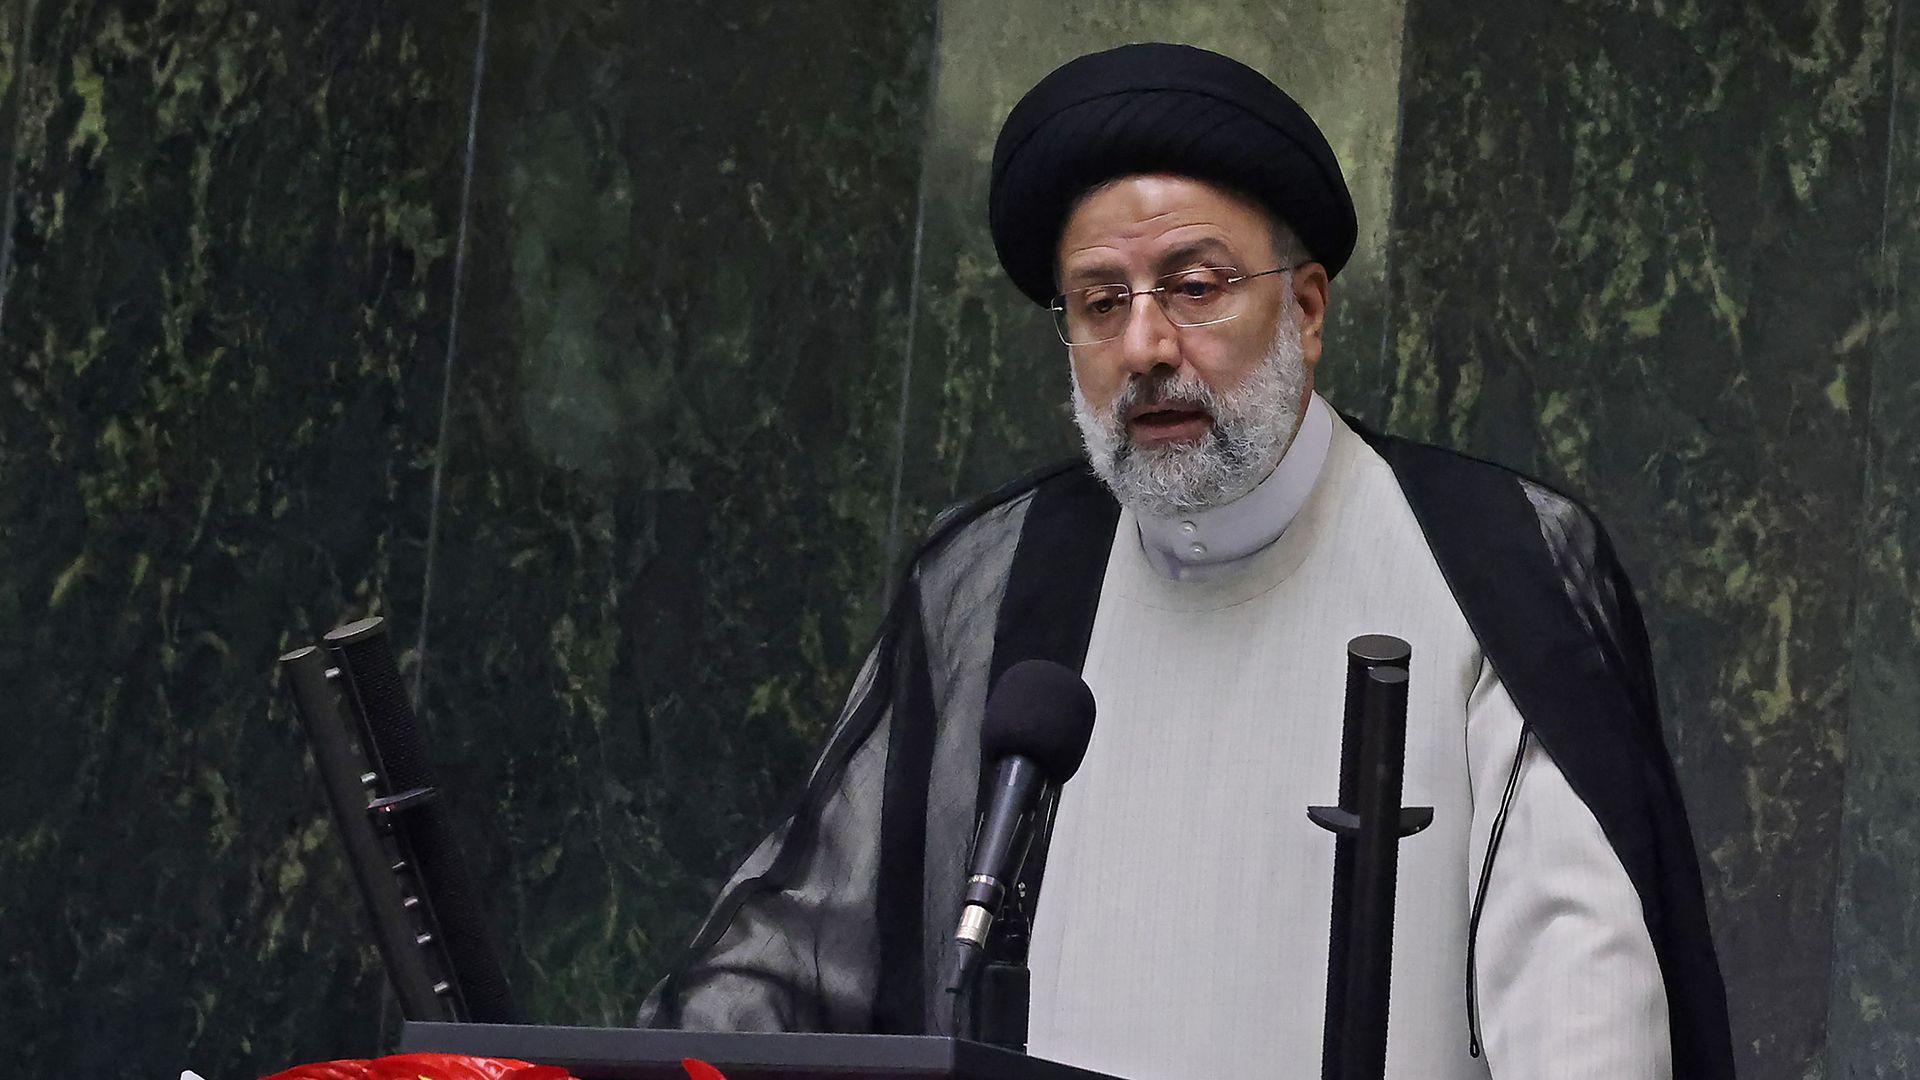 Photo of Ebrahim Raisi speaking from a podium during a swearing-in ceremony